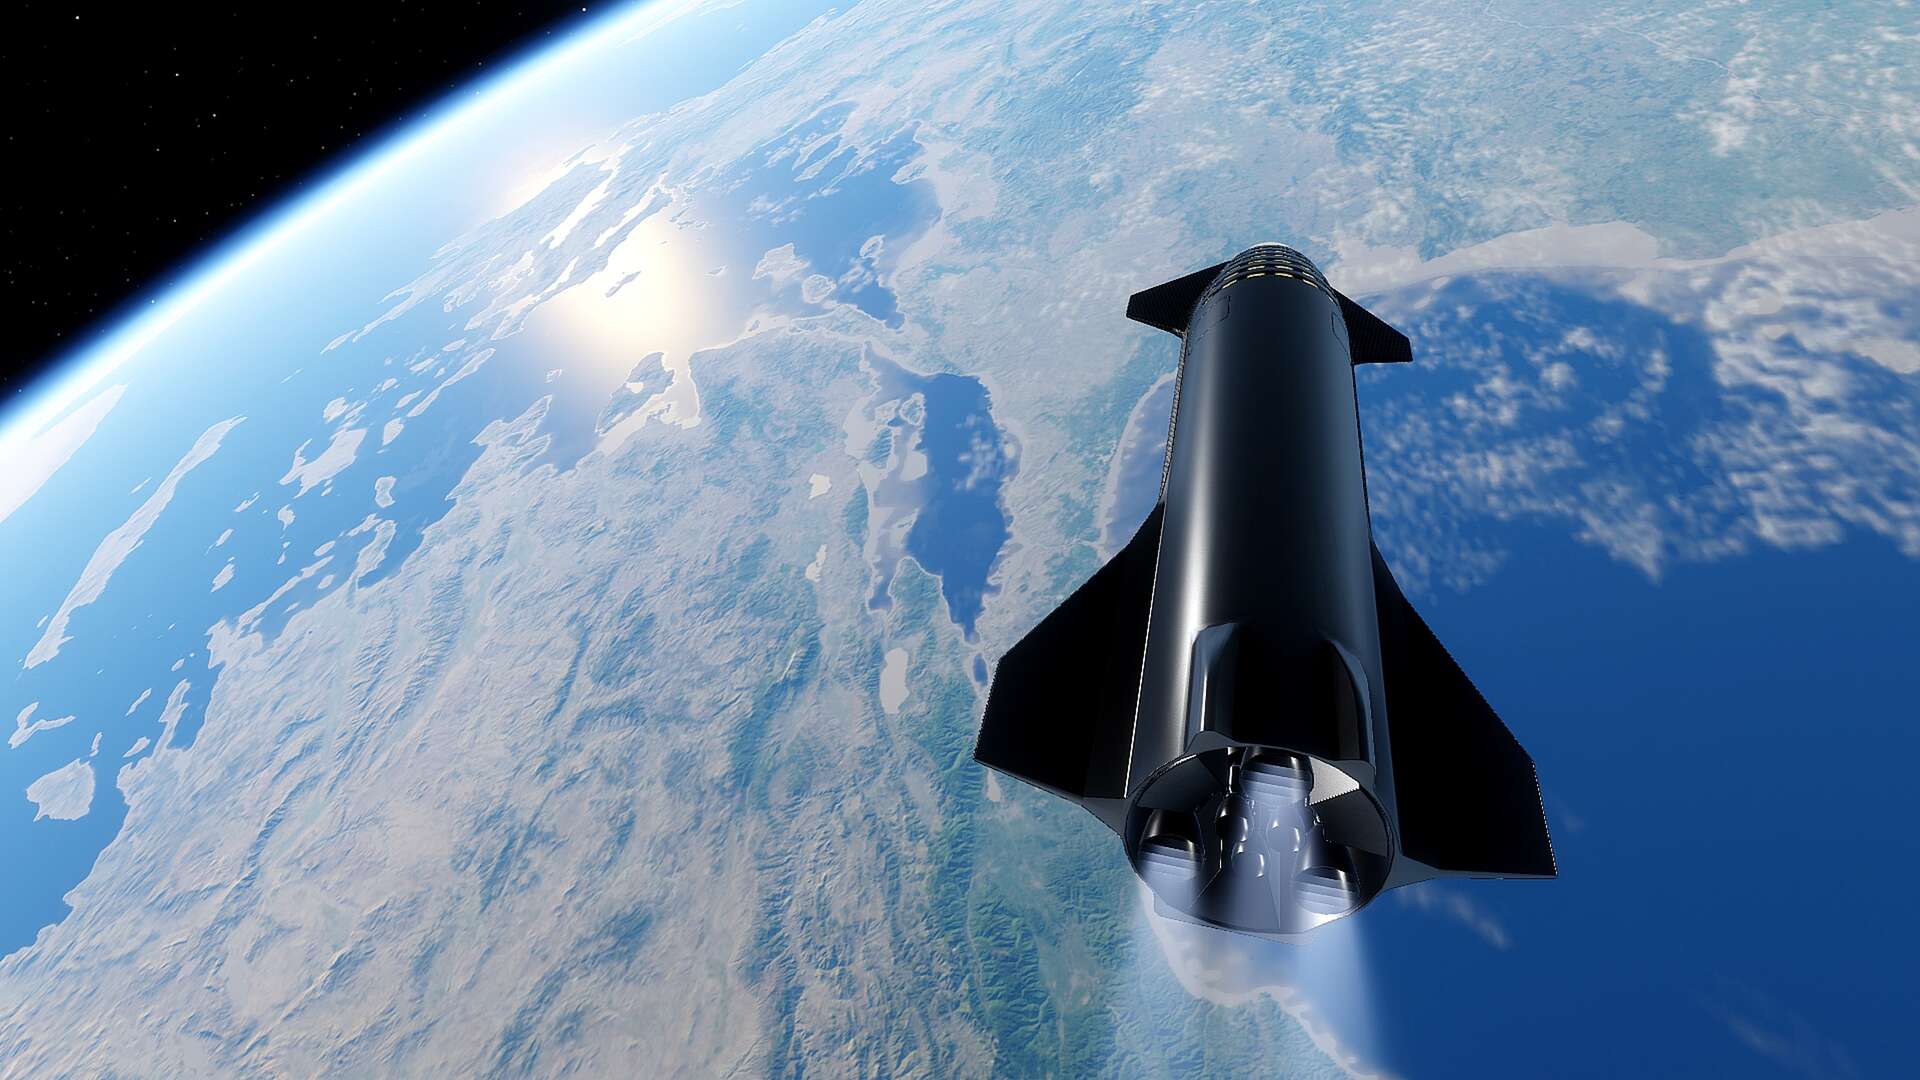 This is what a successful flight of the Starship, the world’s largest rocket, would look like